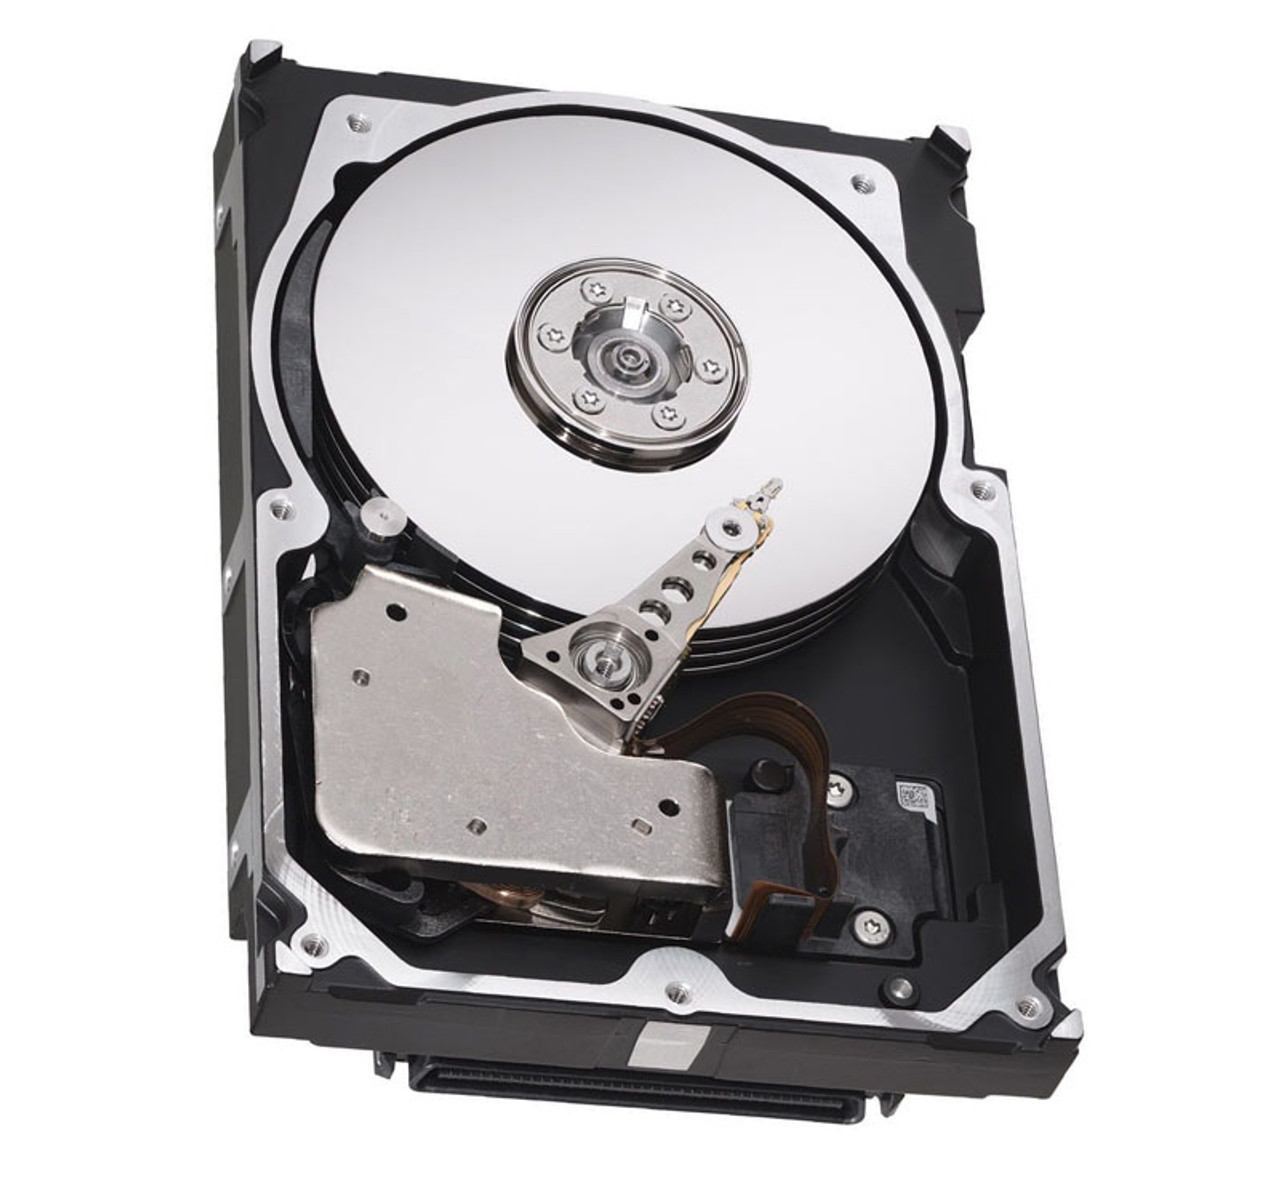 X5886A - Sun 73GB 10000RPM Ultra-320 SCSI LVD Hot-Pluggable 80-Pin 3.5-inch Hard Drive for Sun Fire and StorEdge Server